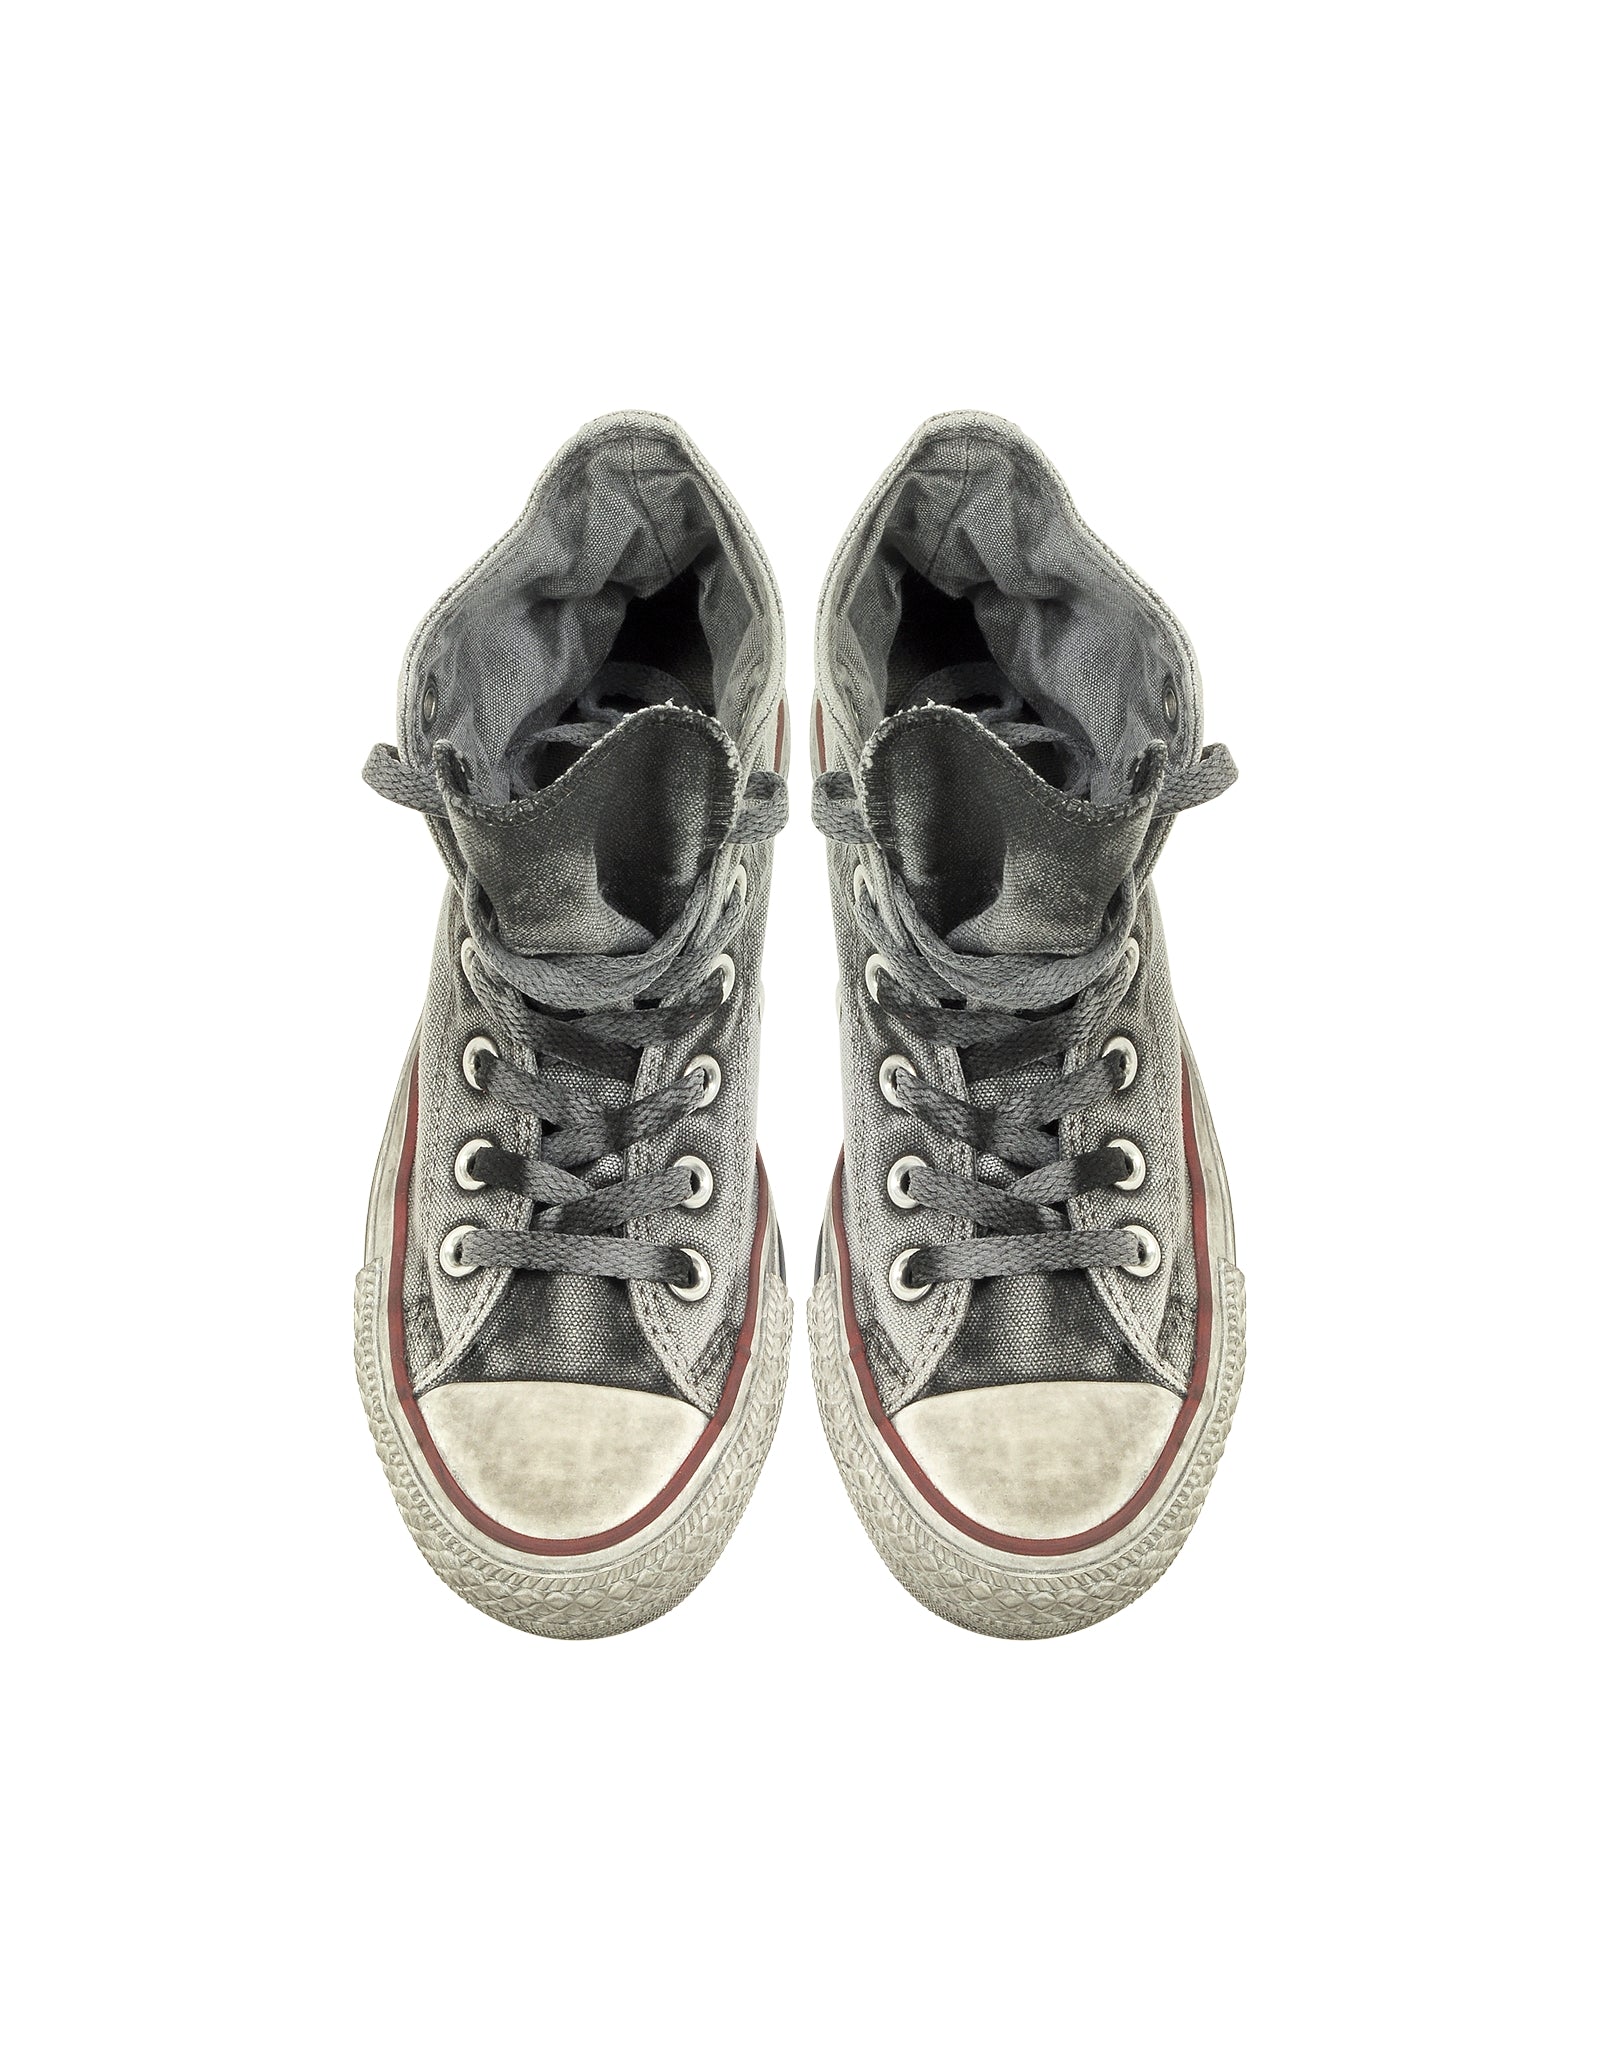 converse all star hi canvas limited edition